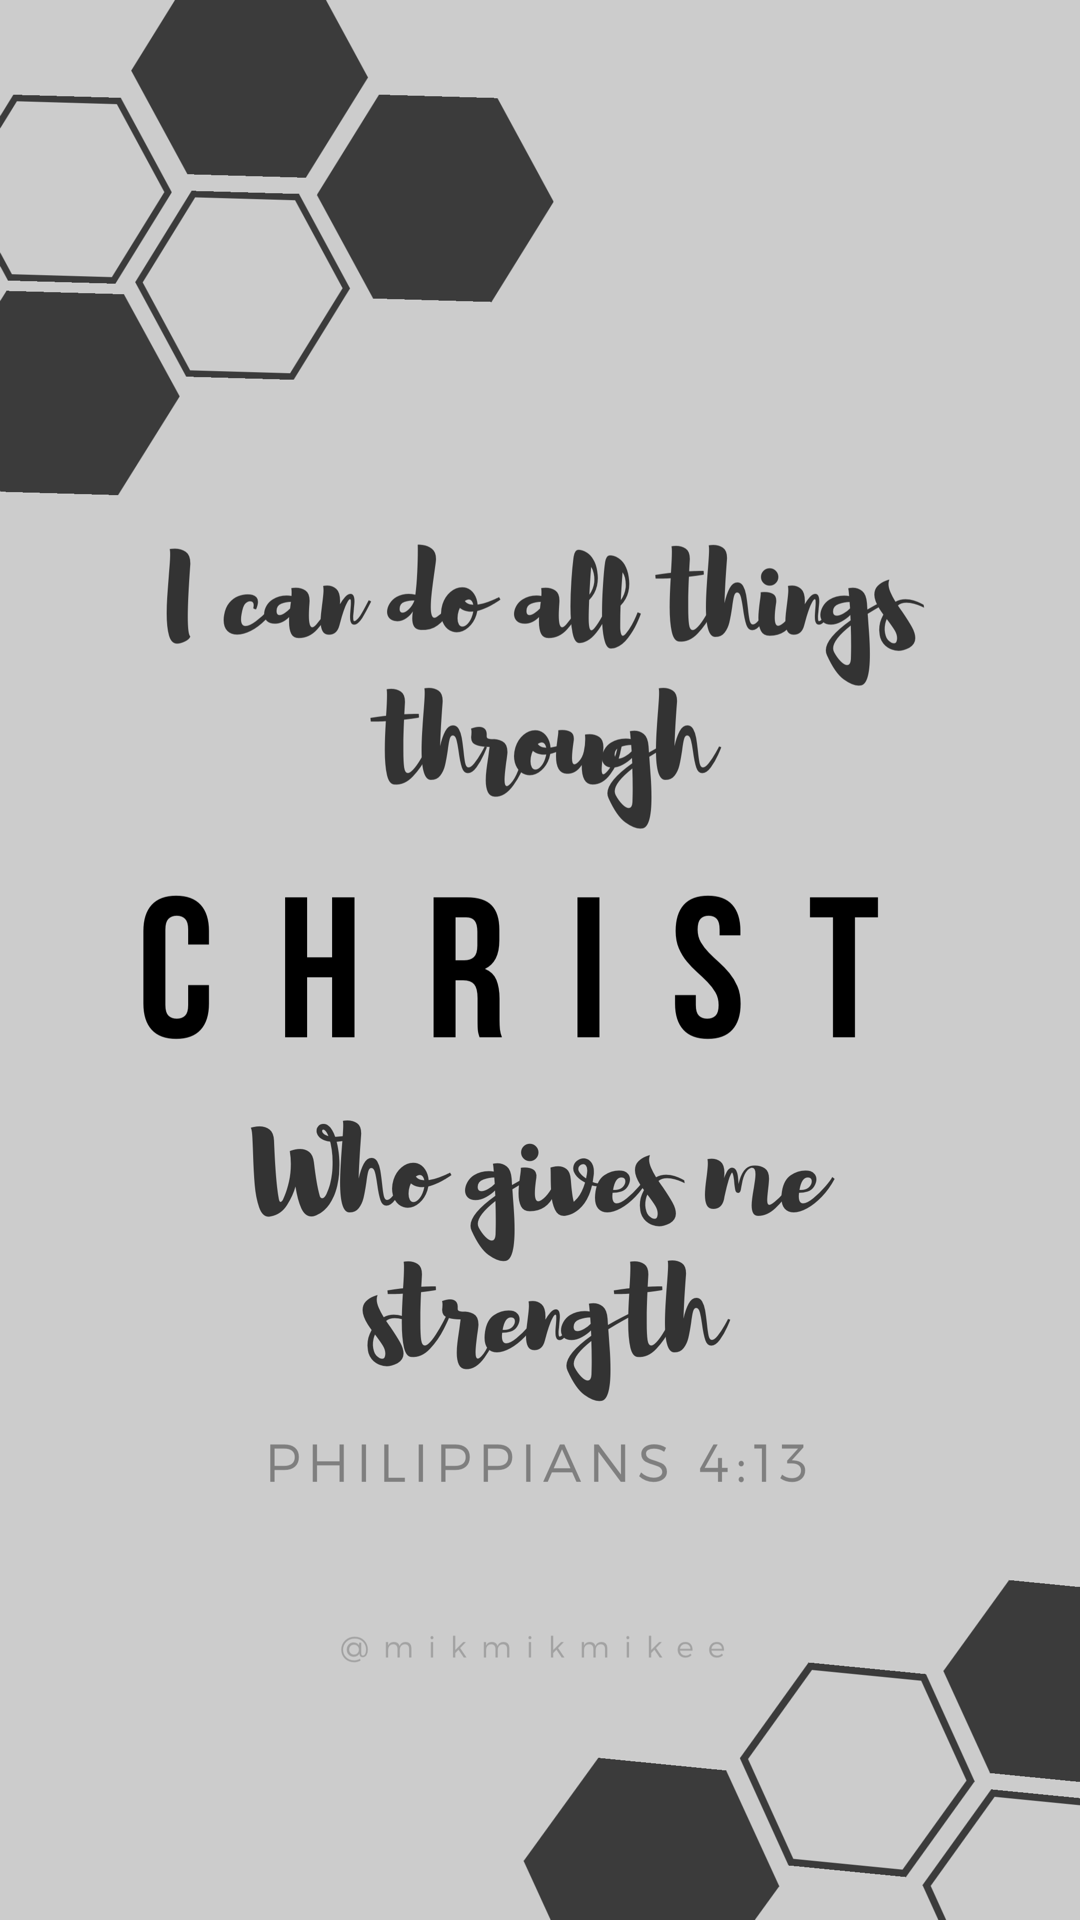 I can do all things through Christ who gives me strength